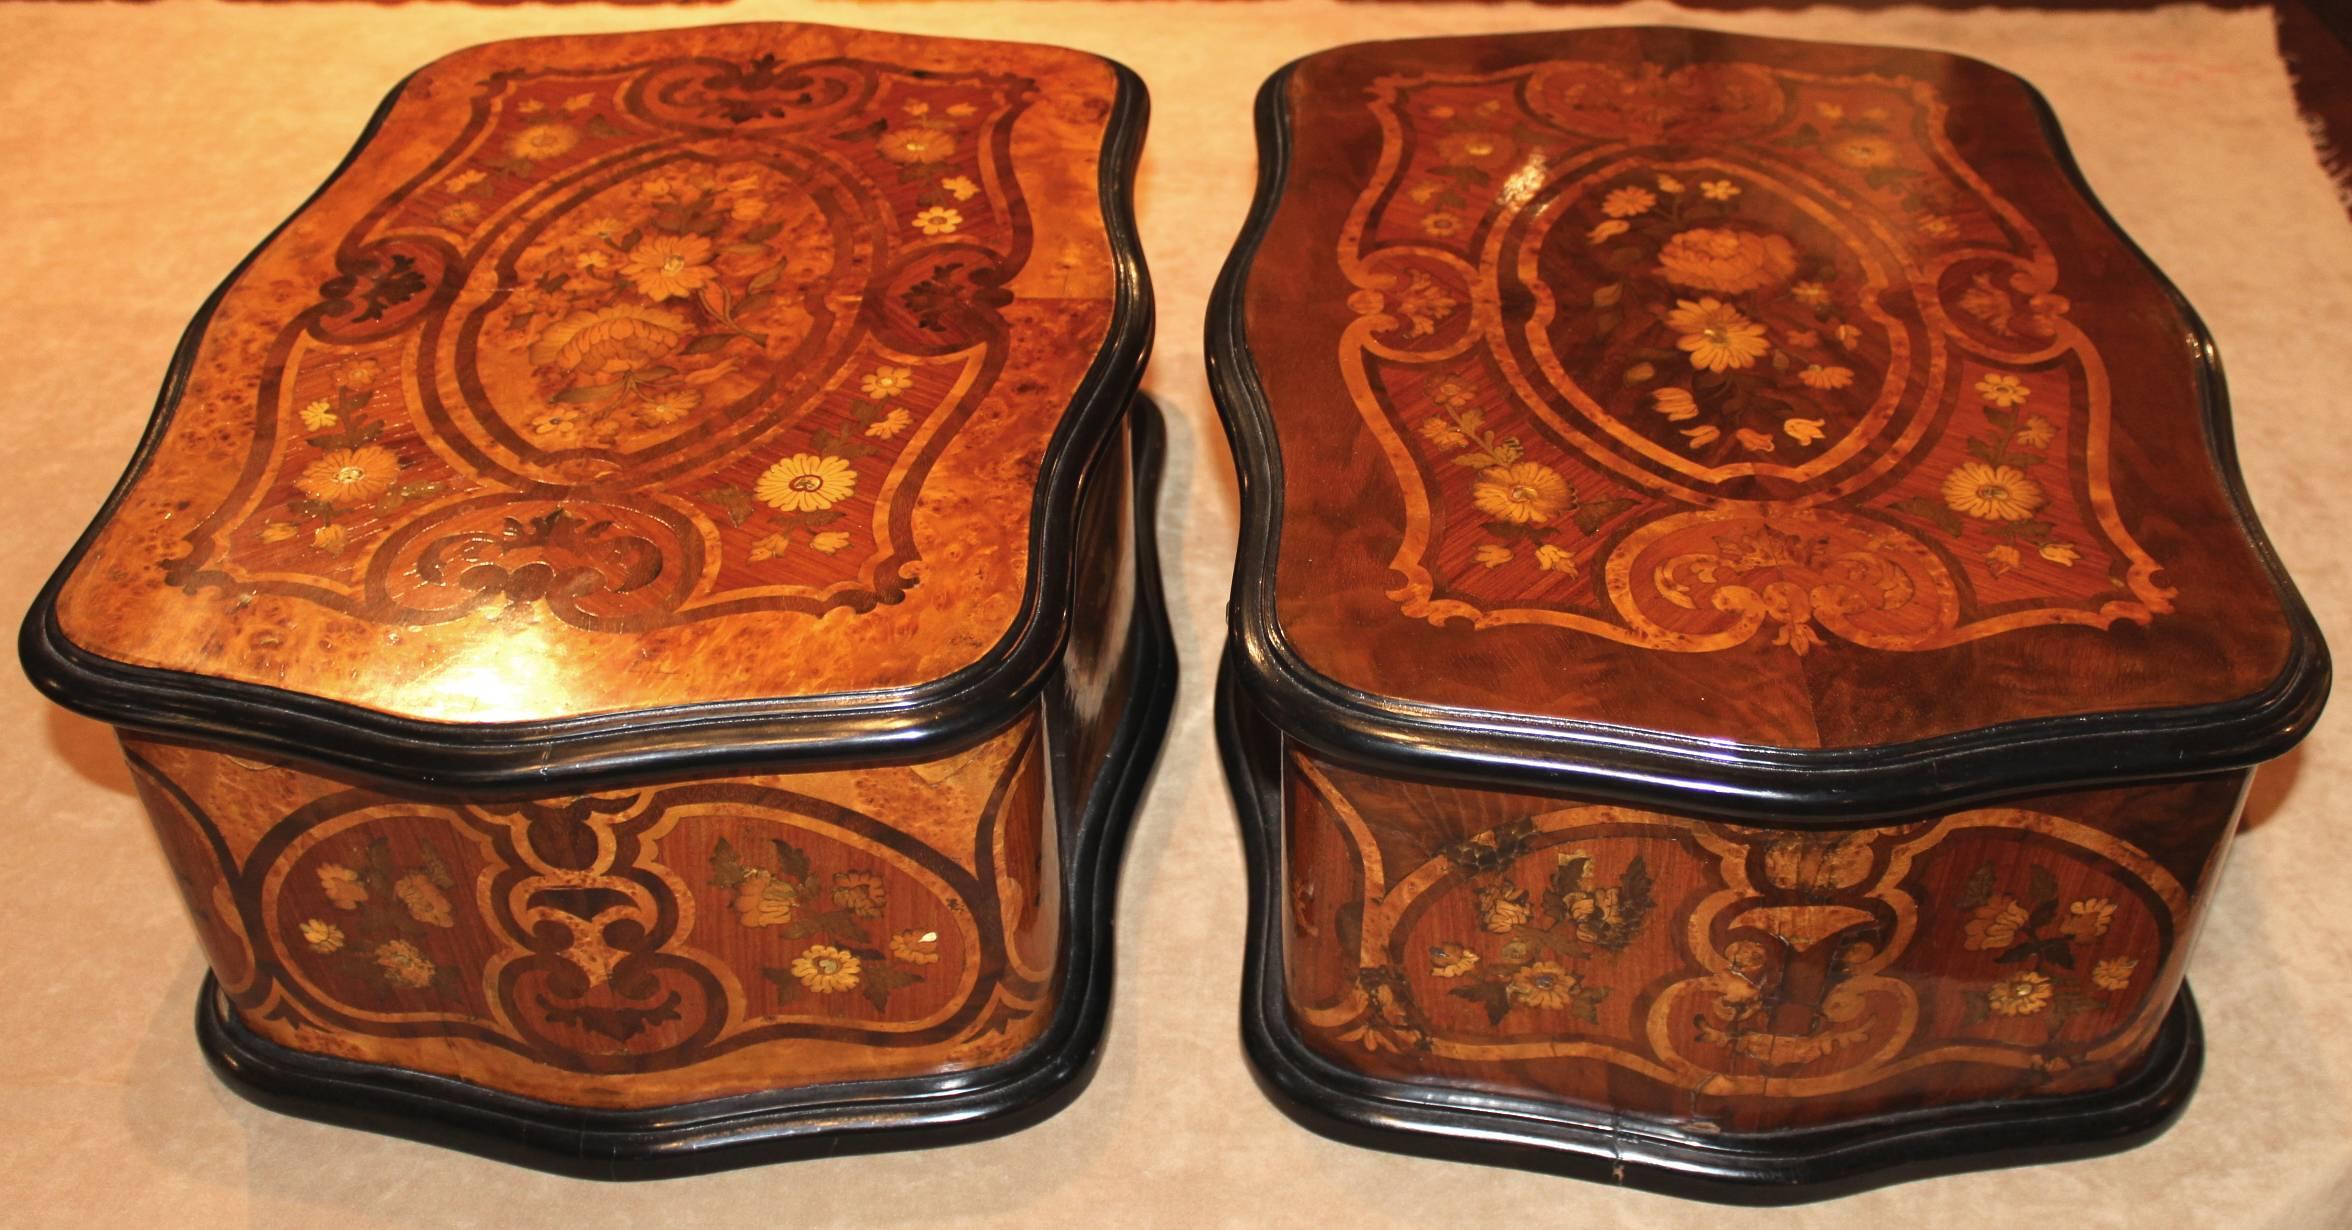 Burl Pair of 19th Century French Marquetry Boxes with Silk Interiors